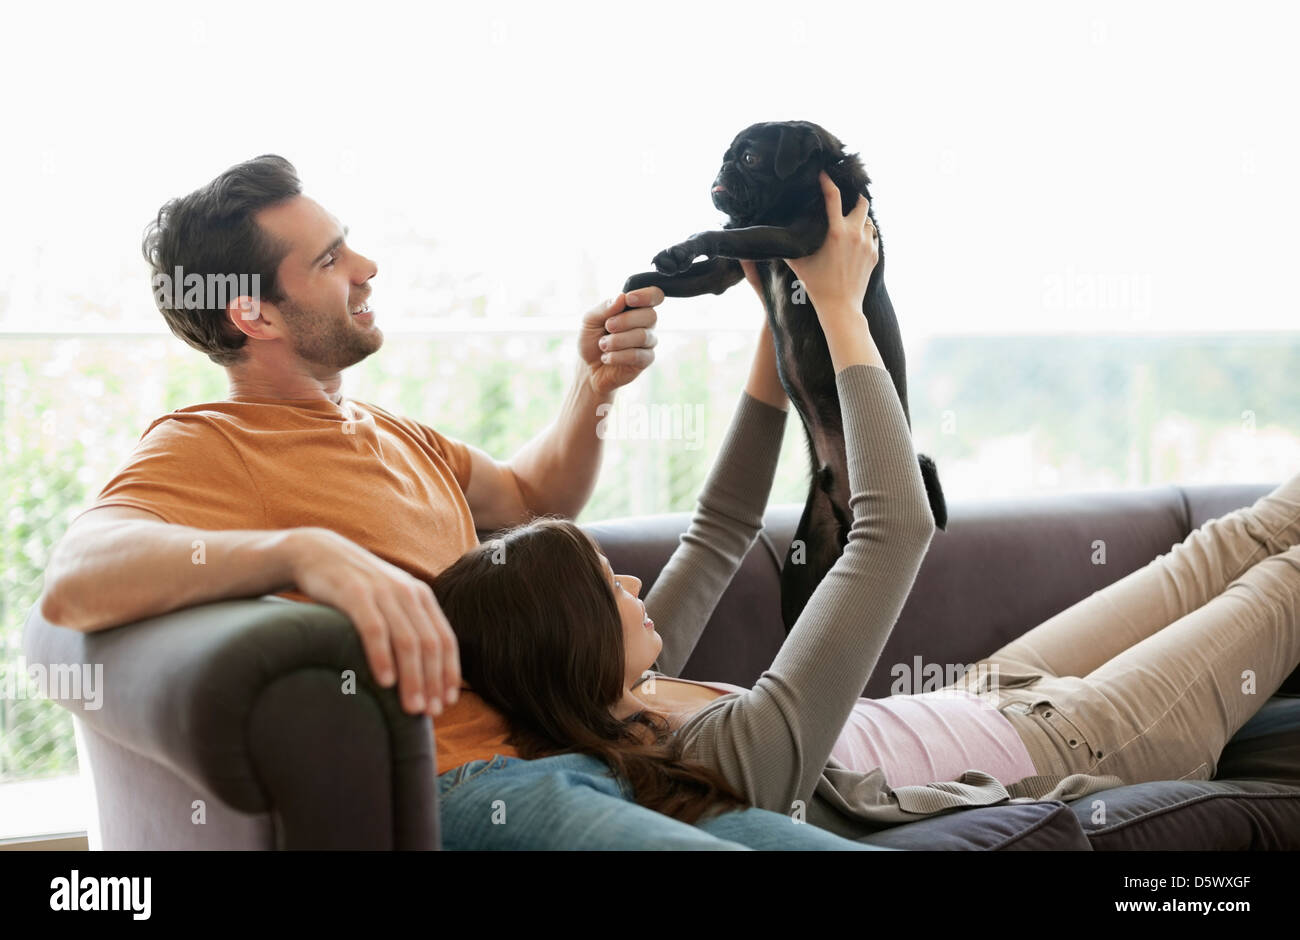 Couple relaxing with dog on sofa Banque D'Images